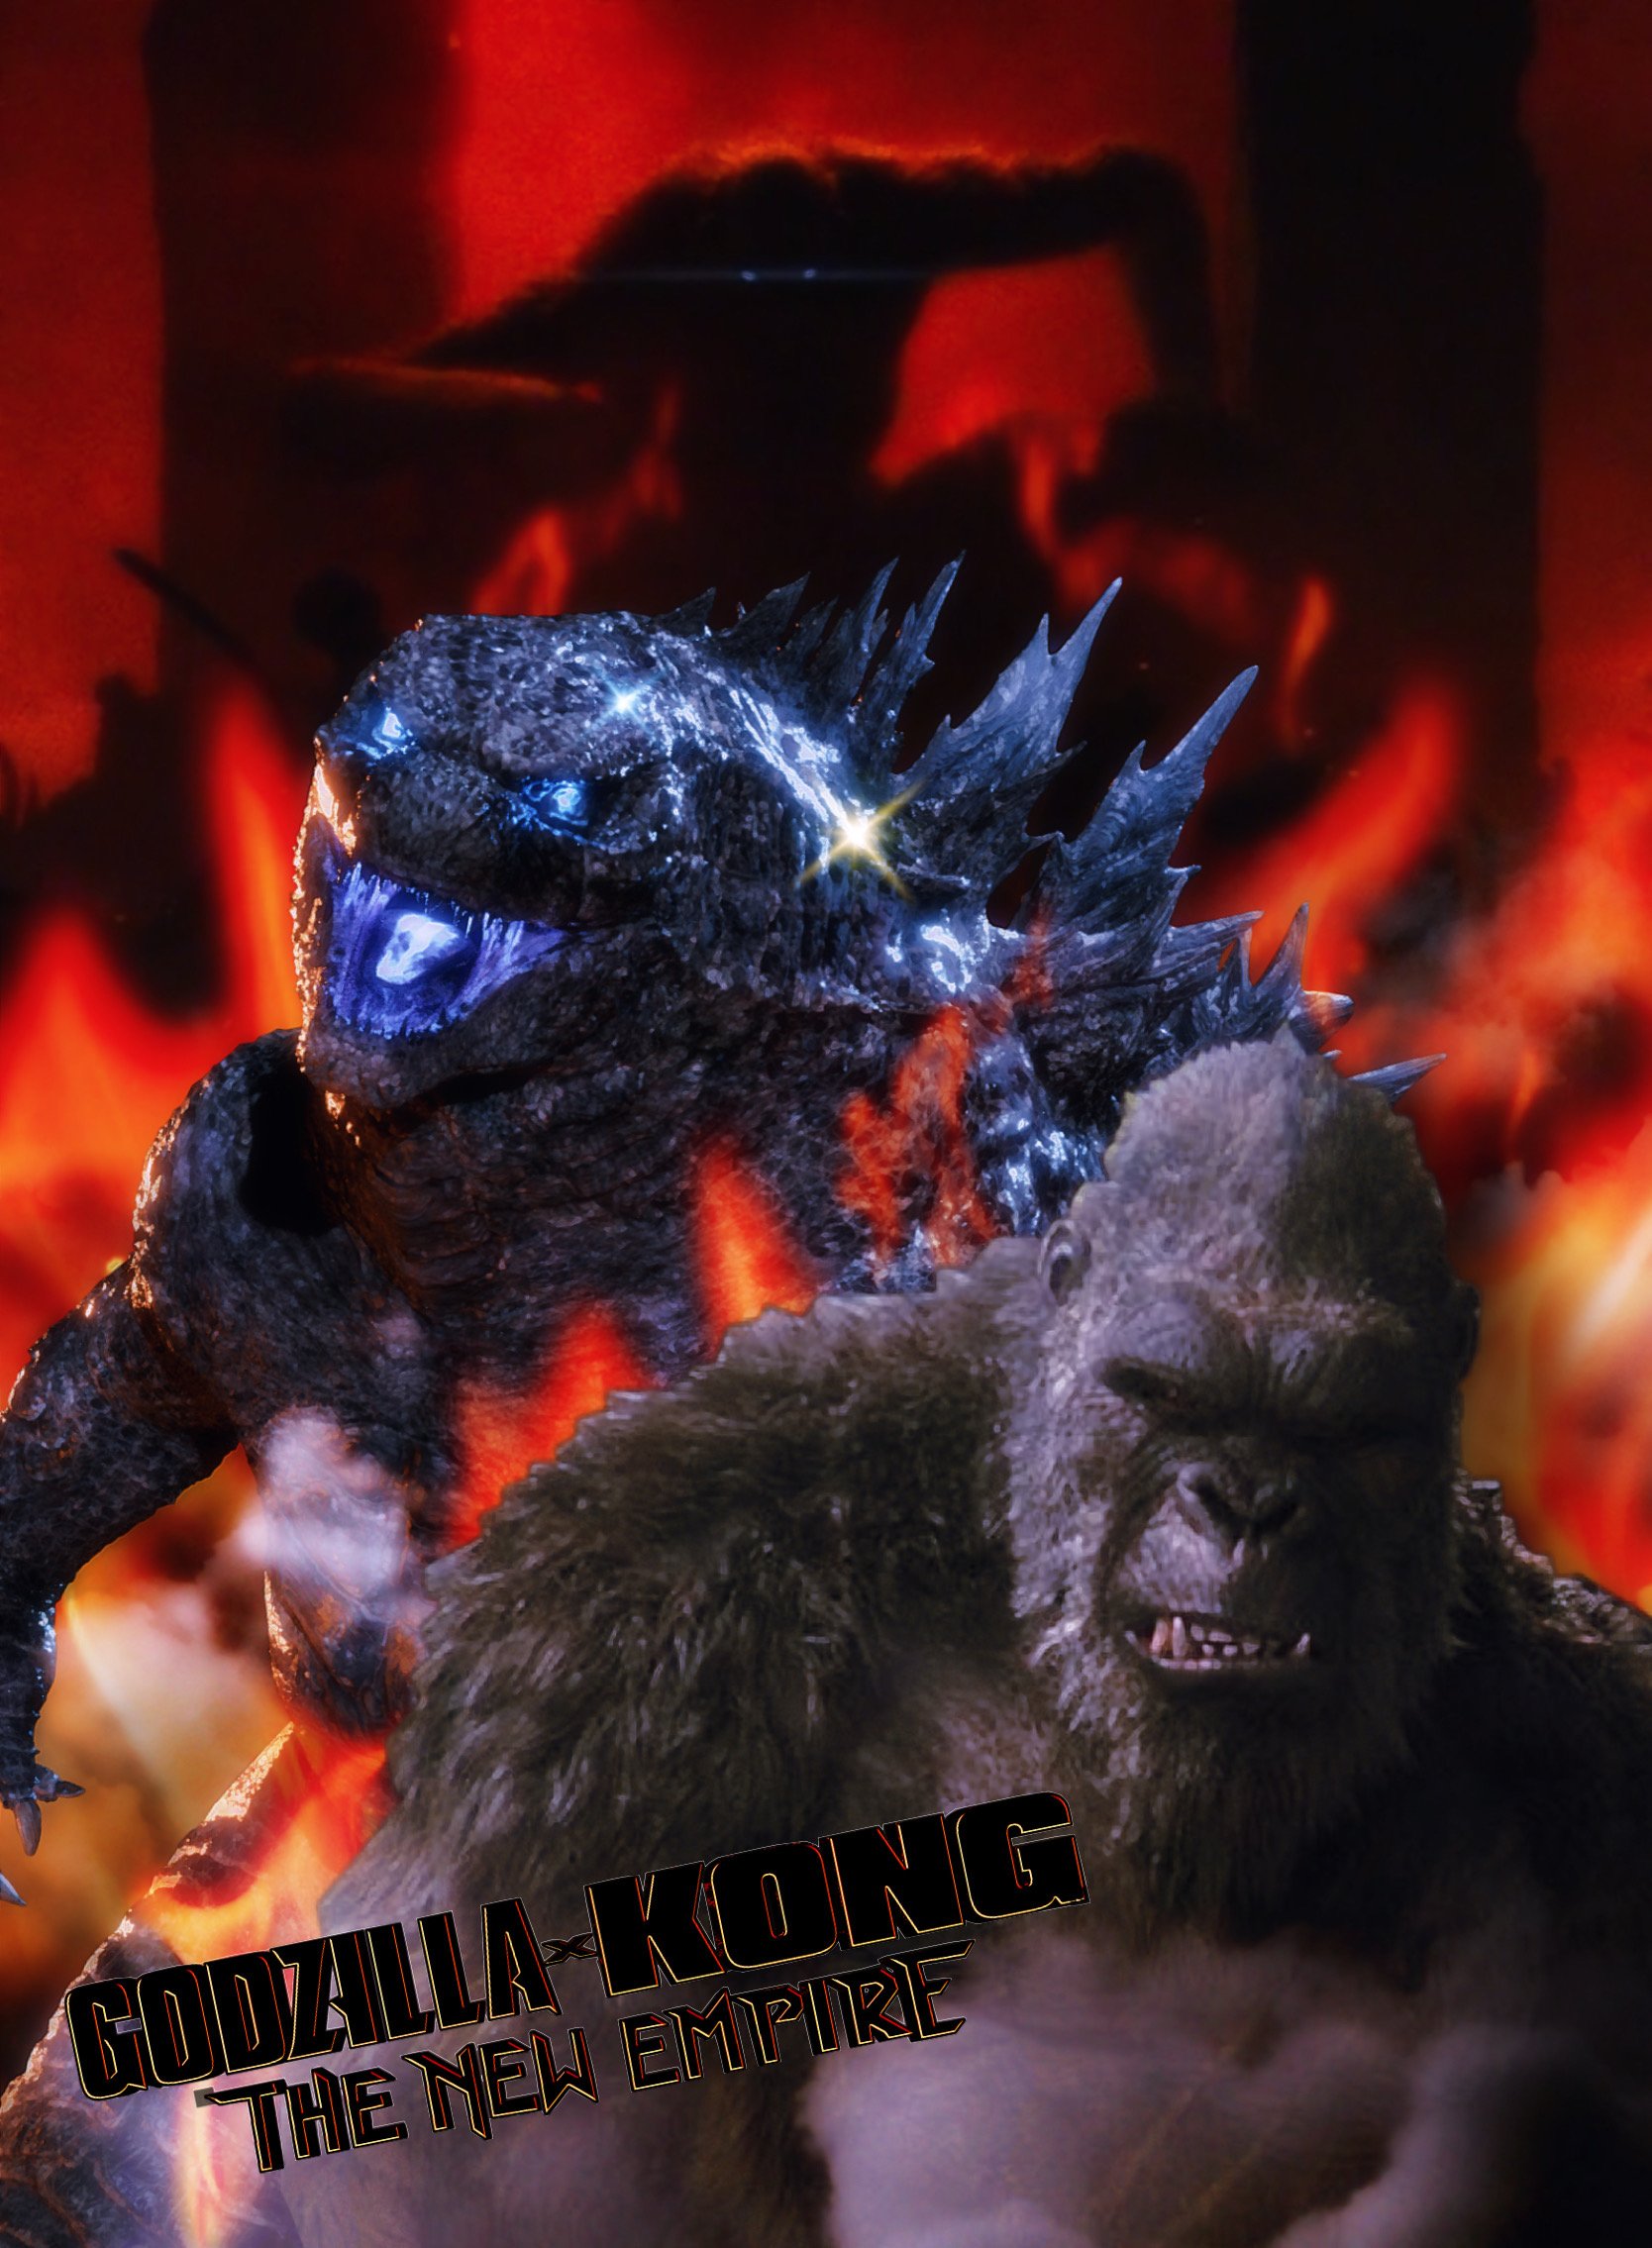 Godzilla x Kong: The New Empire wallpaper Resolution 1668x2270 | Best Download this awesome wallpaper - Cool Wallpaper HD - CoolWallpaper-HD.com